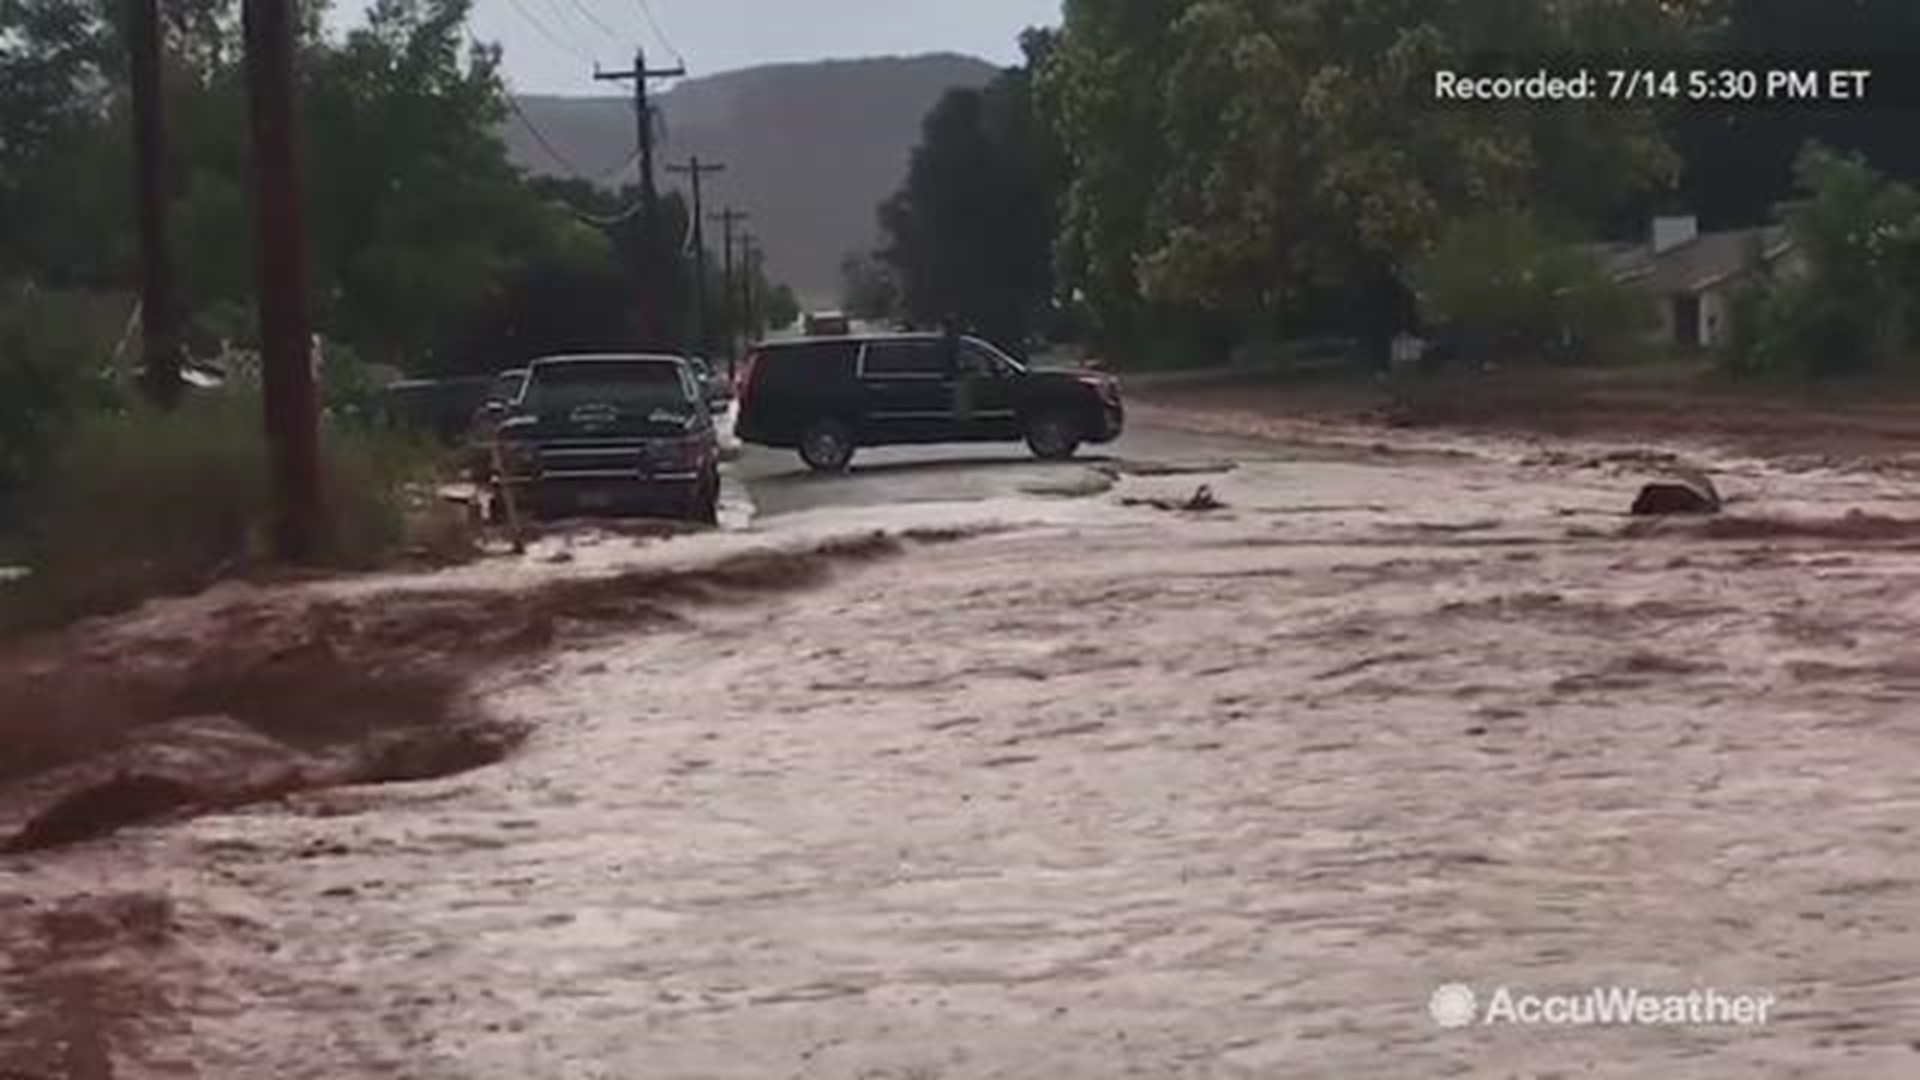 Reed Timmer was in Kanab, Utah on July 14 where major flash flooding has greatly slowed traffic and turned streets into raging rivers.